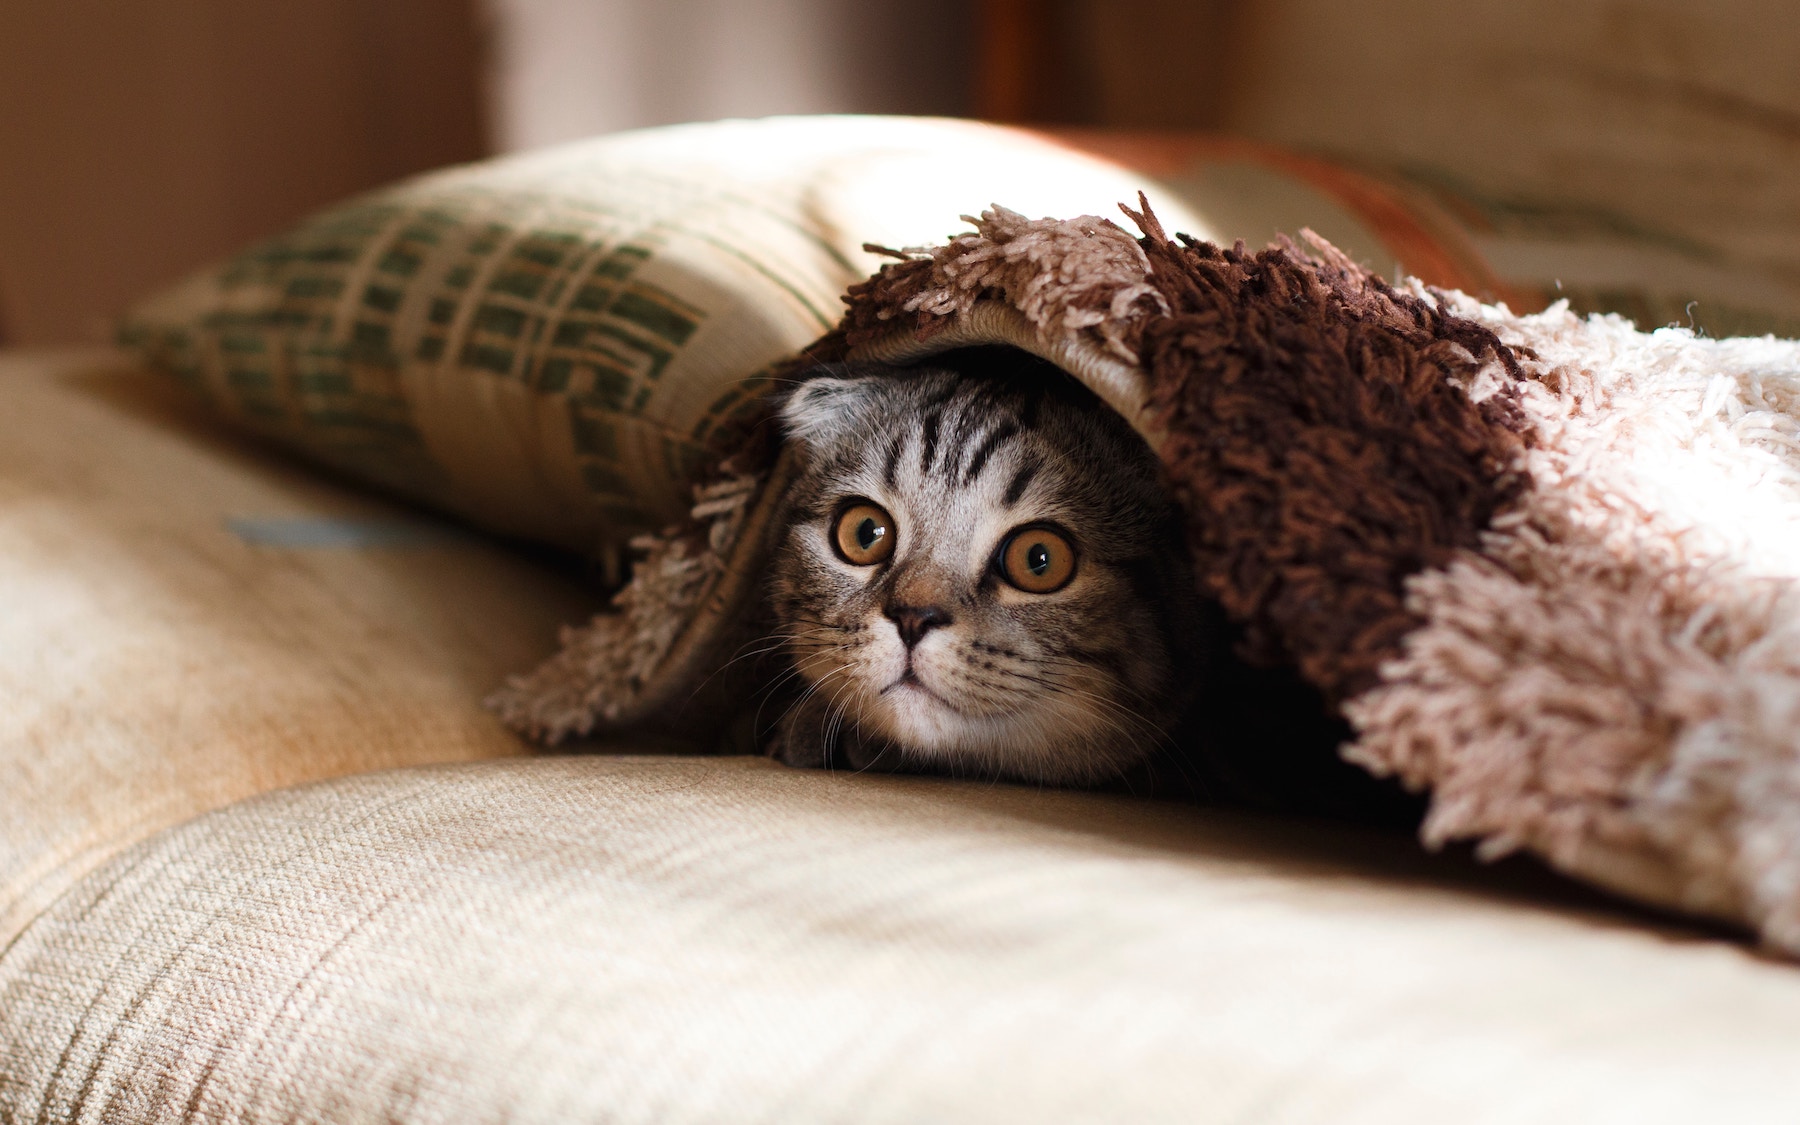 Kitten-Proofing Your Home: 10 Essential Tips﻿